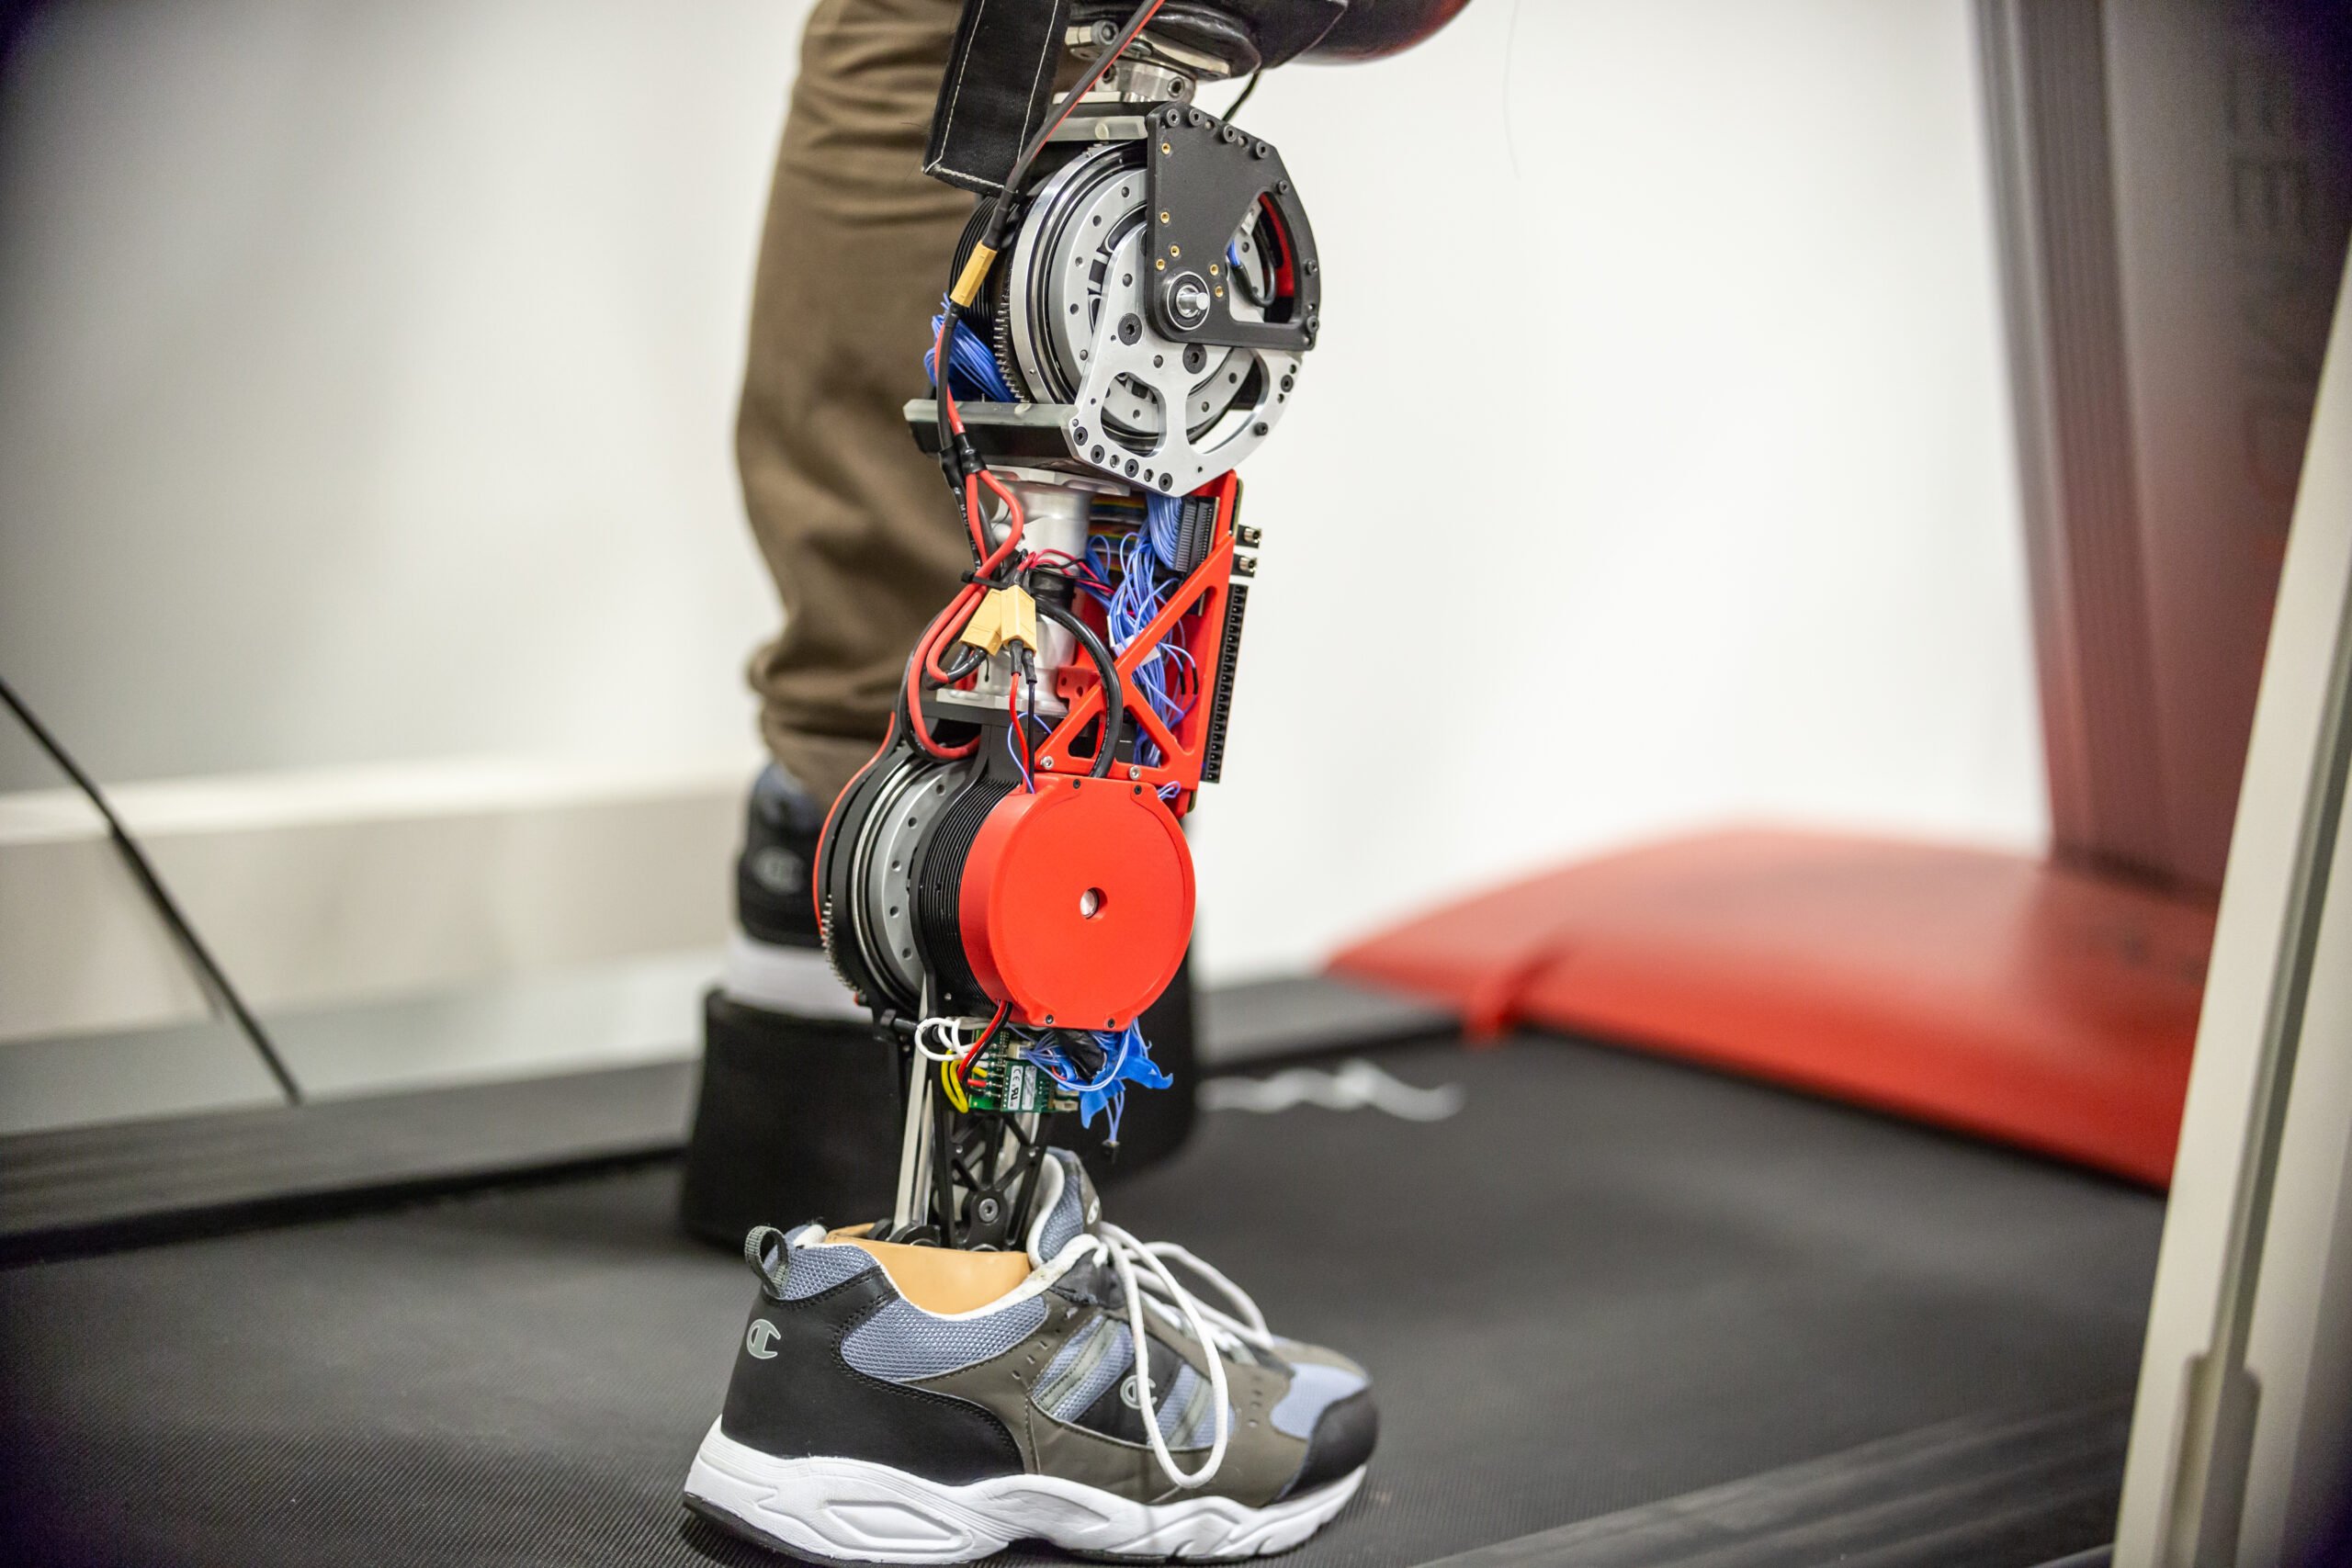 A student tests the robotic leg at the University of Texas at Dallas. The strong motors powering the knee and ankle can propel the user’s body while allowing the knee to swing freely, with regenerative braking to extend battery life. Source: University of Texas at Dallas